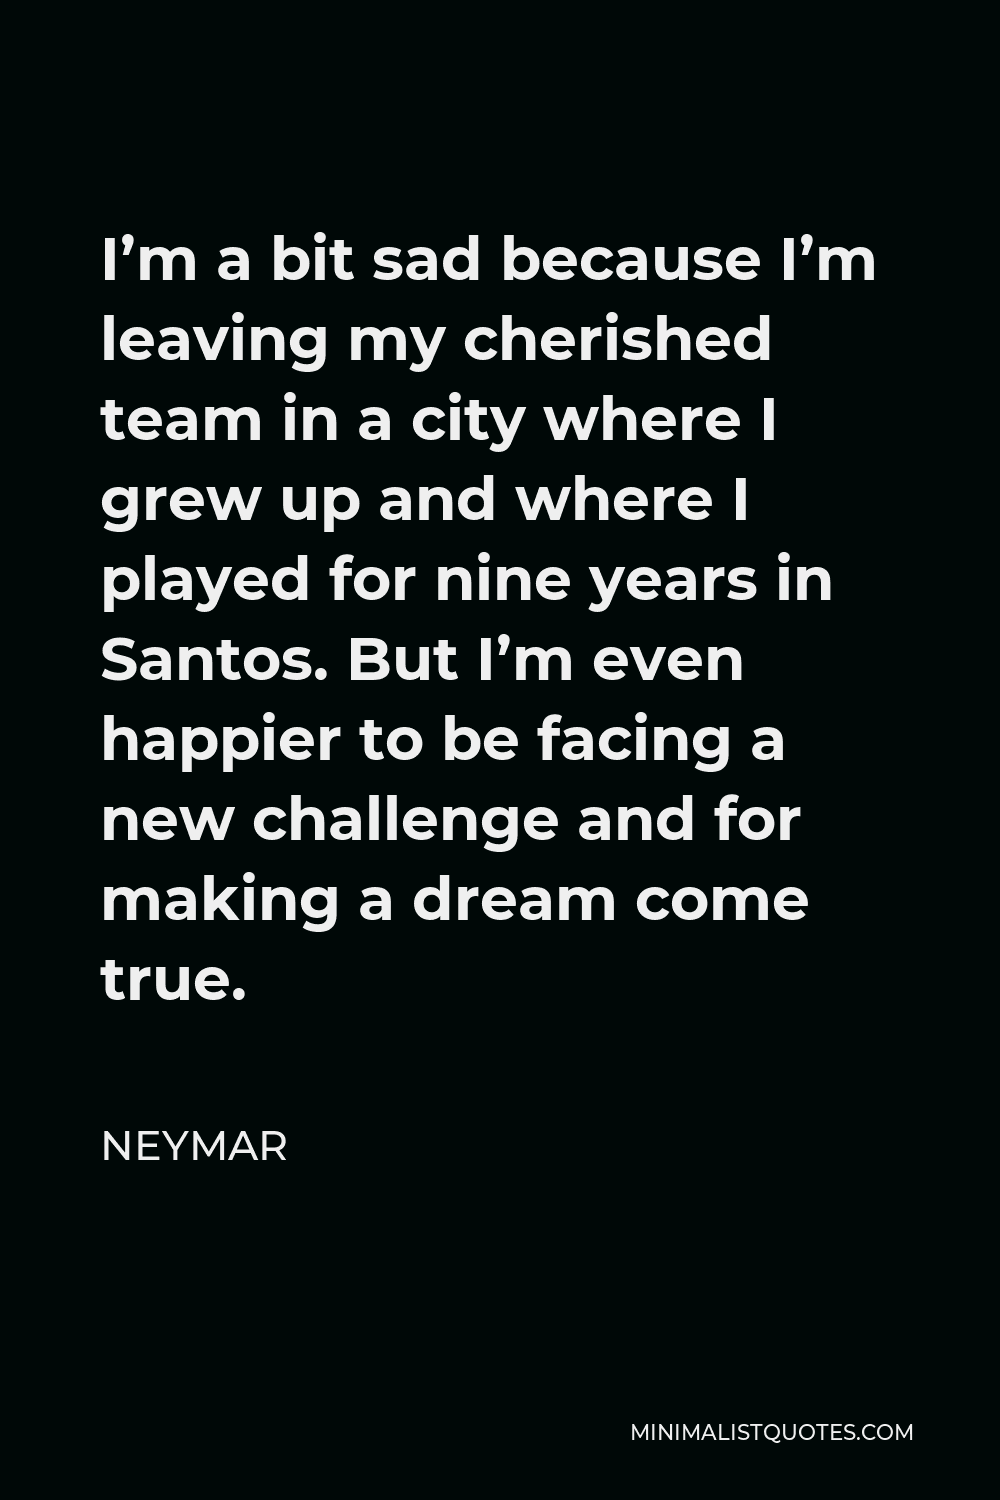 Neymar Quote - I’m a bit sad because I’m leaving my cherished team in a city where I grew up and where I played for nine years in Santos. But I’m even happier to be facing a new challenge and for making a dream come true.